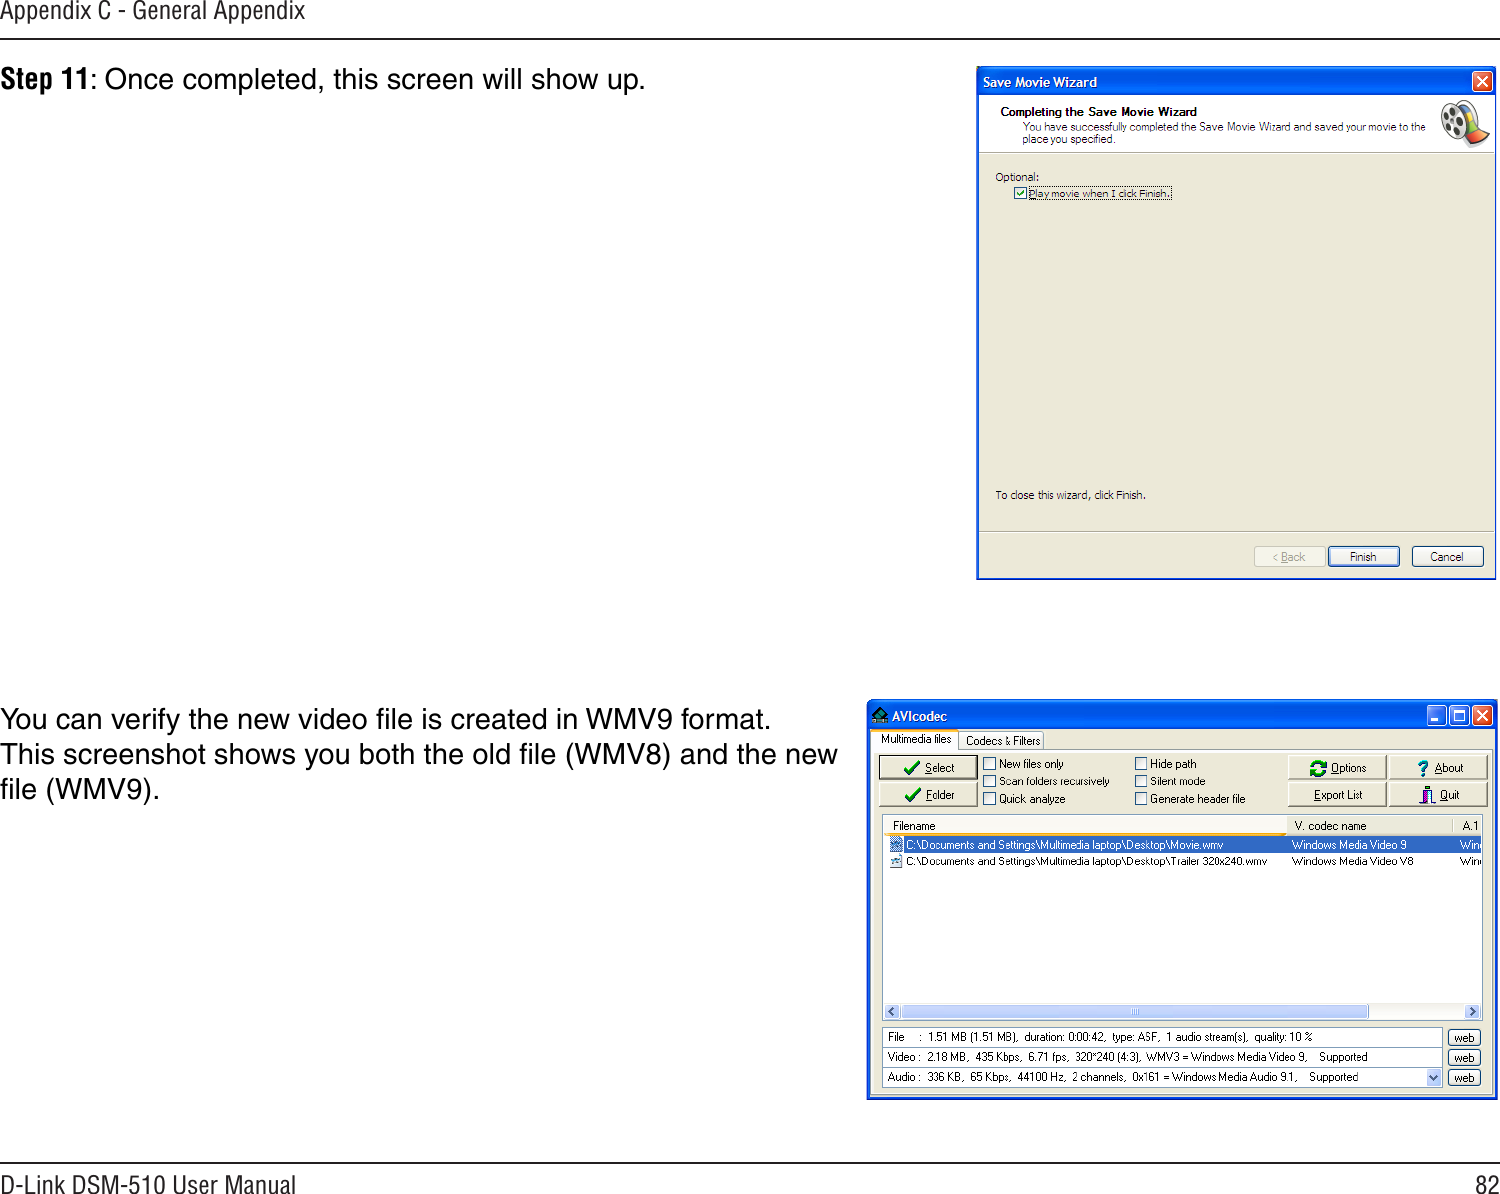 82D-Link DSM-510 User ManualAppendix C - General AppendixStep 11: Once completed, this screen will show up.You can verify the new video ﬁle is created in WMV9 format.  This screenshot shows you both the old ﬁle (WMV8) and the new ﬁle (WMV9). 